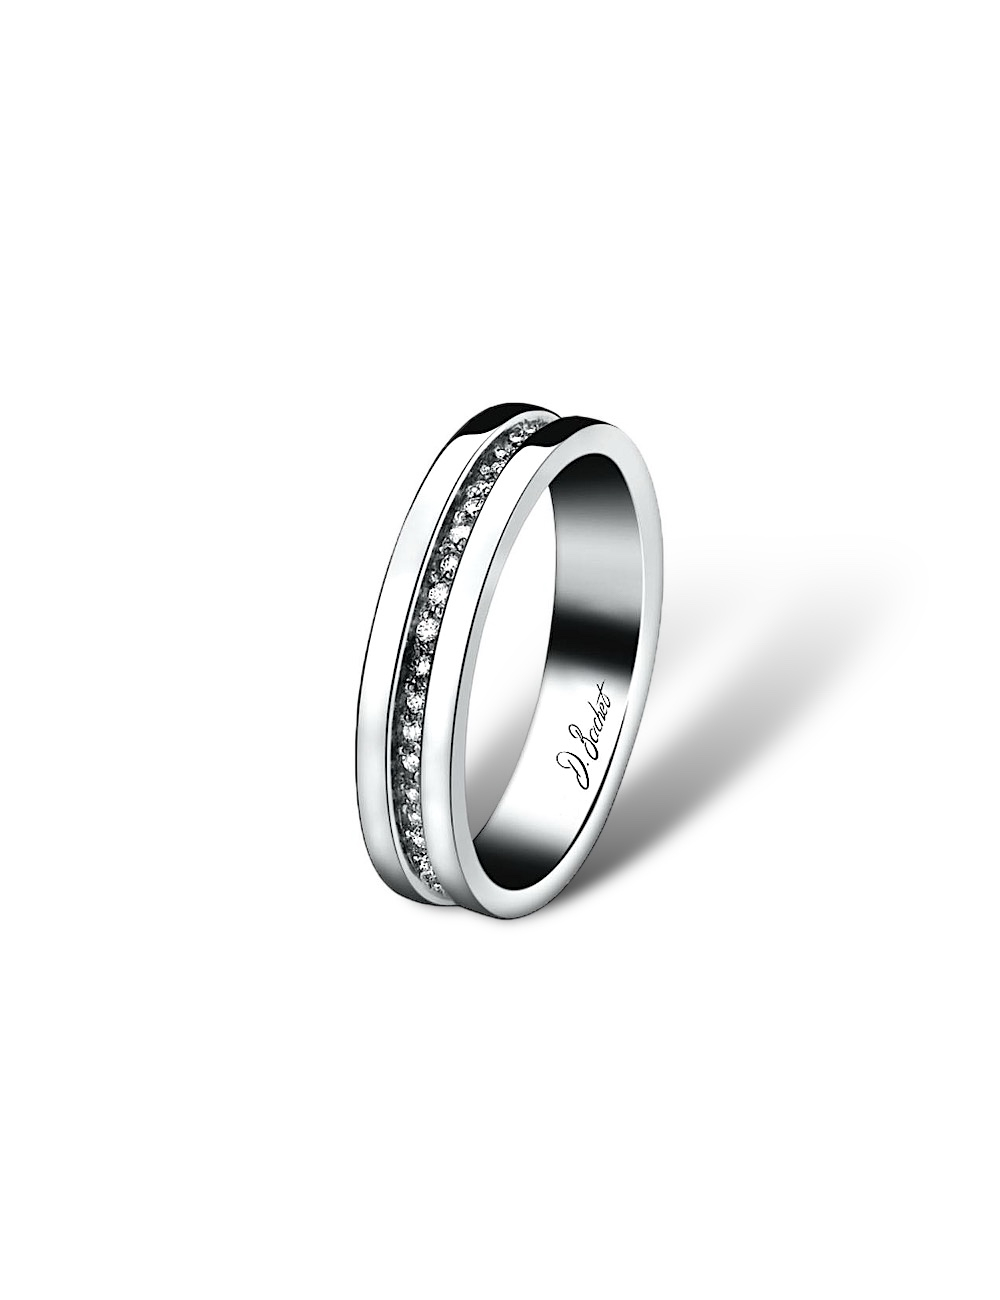 Modern 4.5 mm women's wedding band in platinum, gold, lower-set white diamonds, also in black, for a refined, quiet luxury.